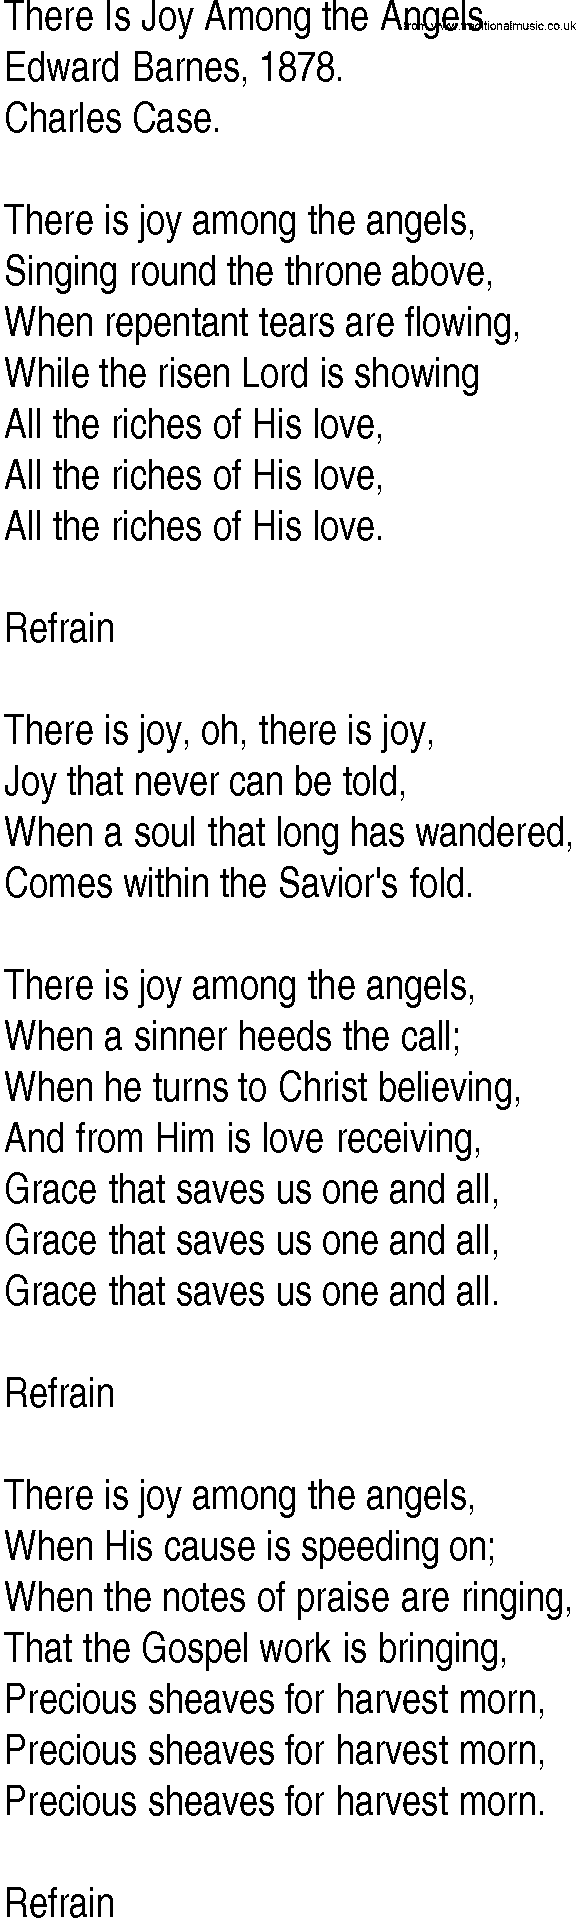 Hymn and Gospel Song: There Is Joy Among the Angels by Edward Barnes lyrics